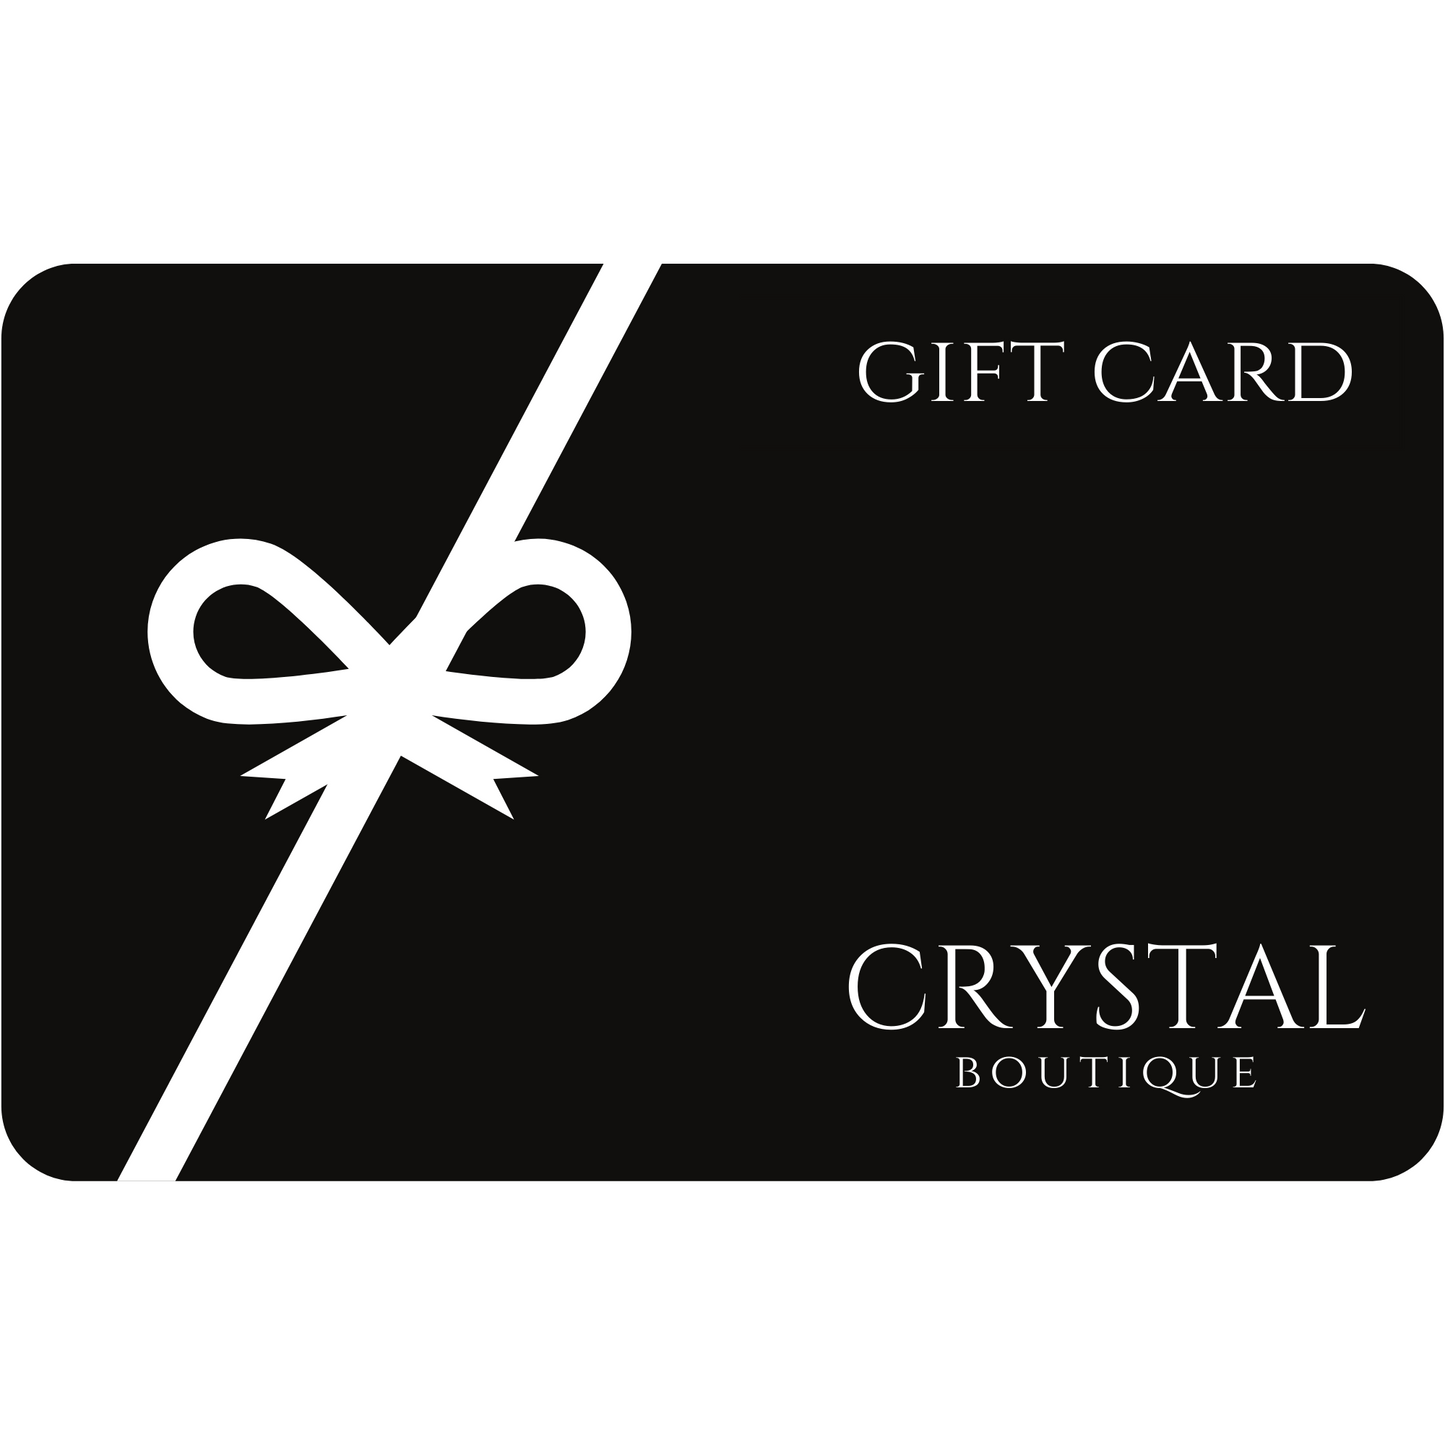 Crystal Boutique Gift Cards £20 - £200